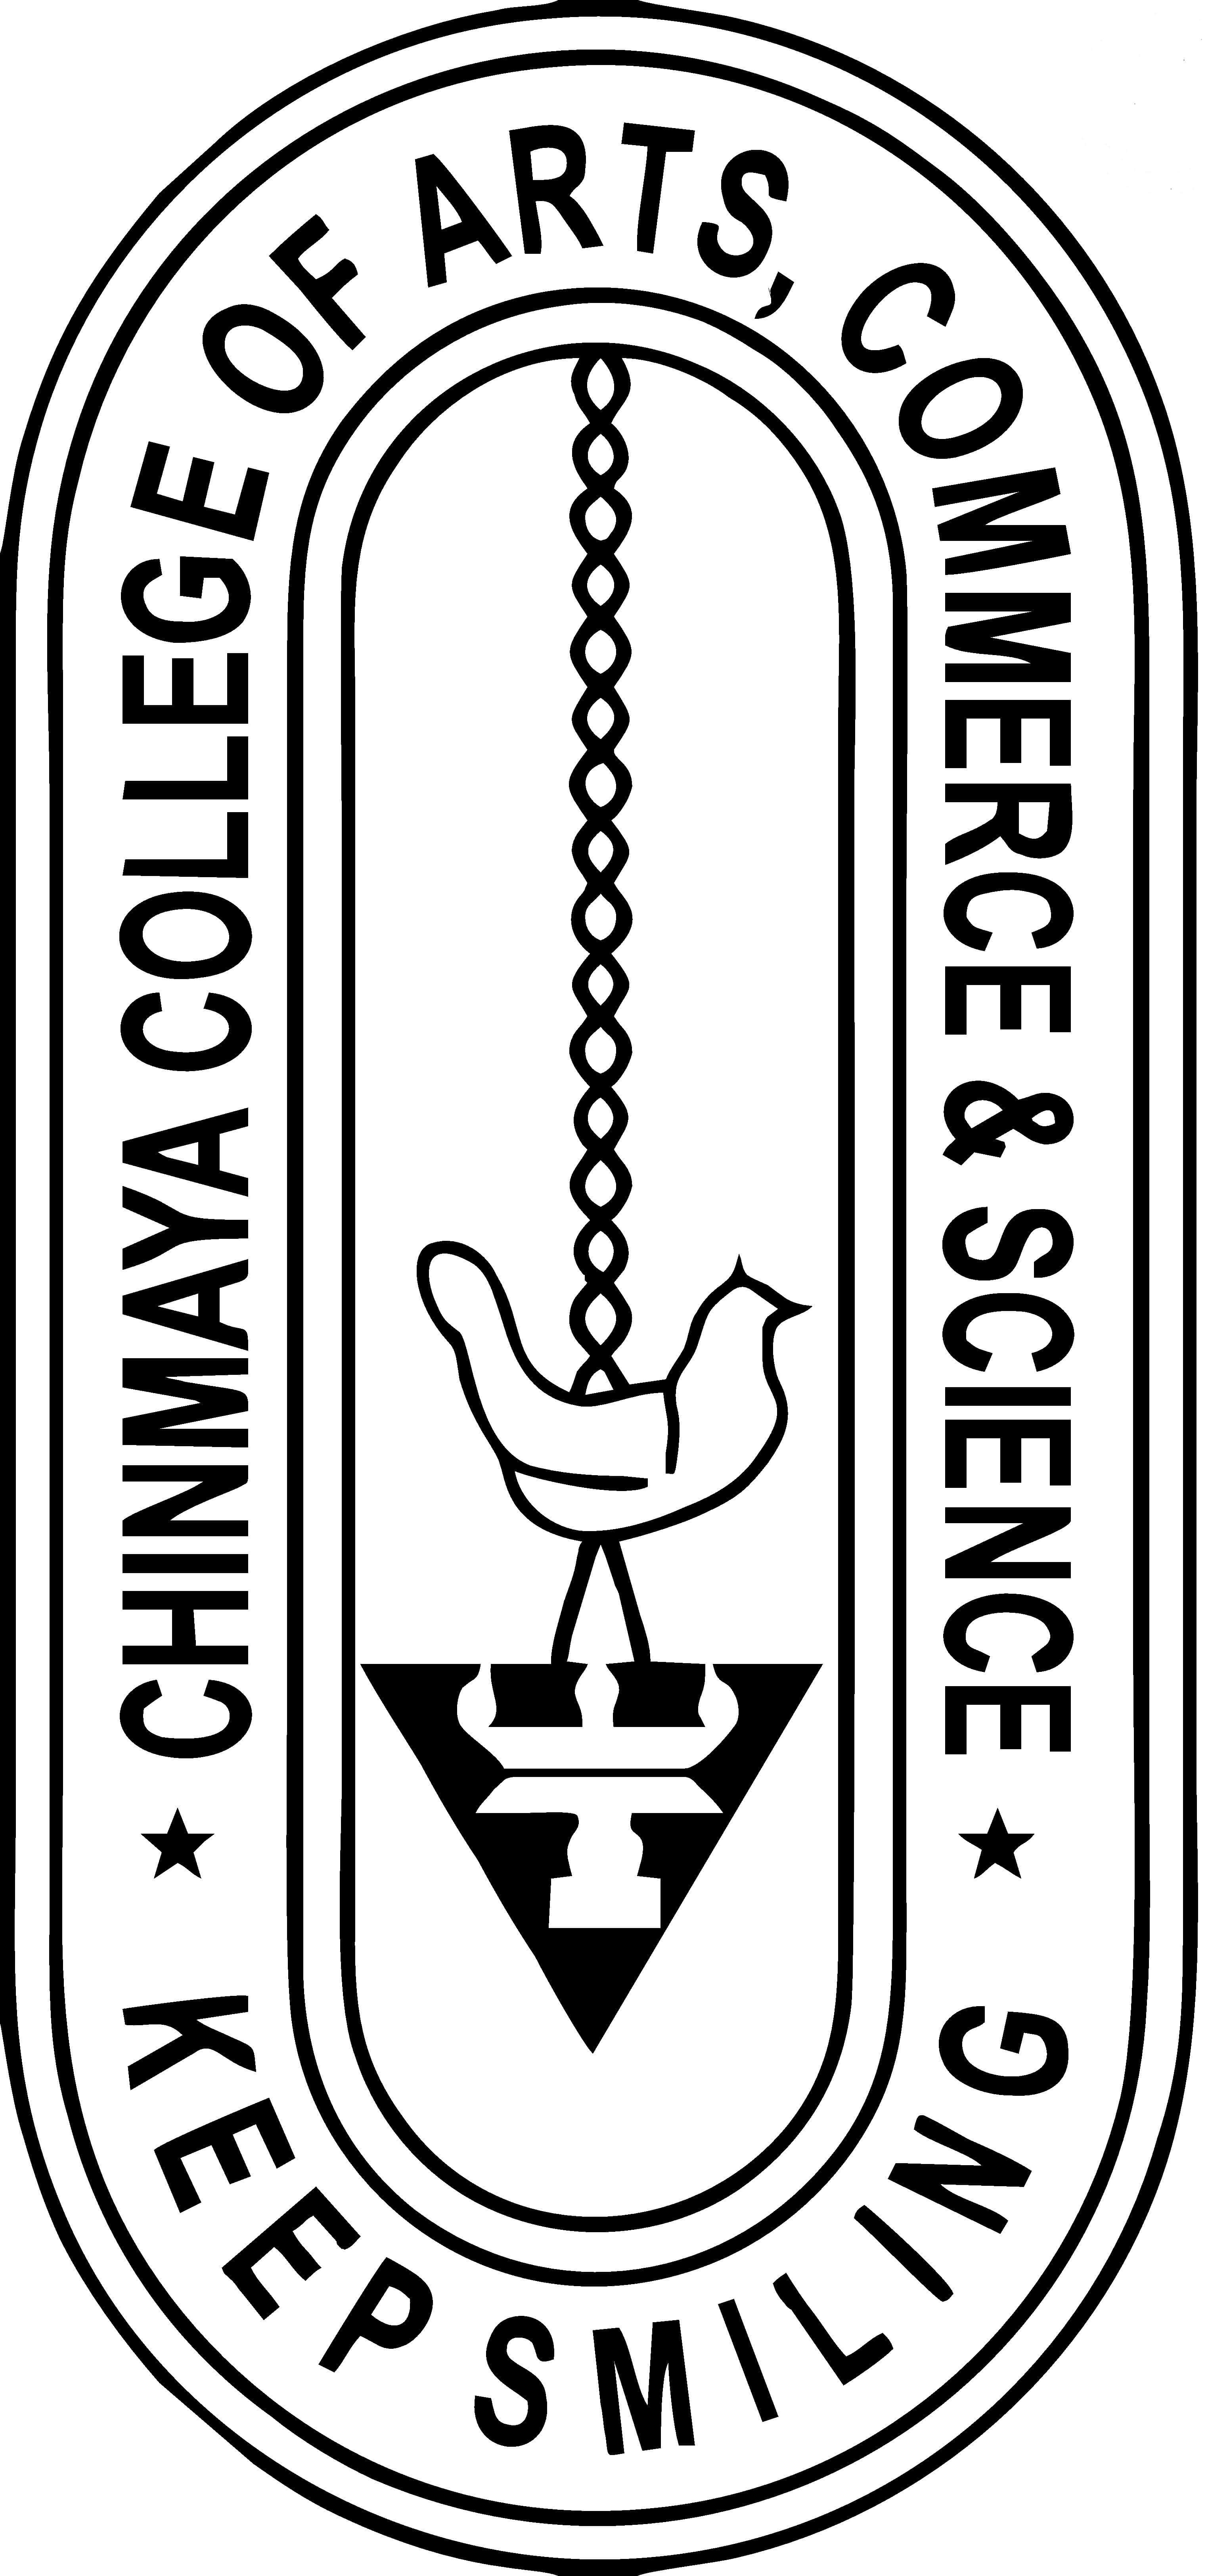 CHINMAYA COLLEGE OF ARTS, COMMERCE AND SCIENCE